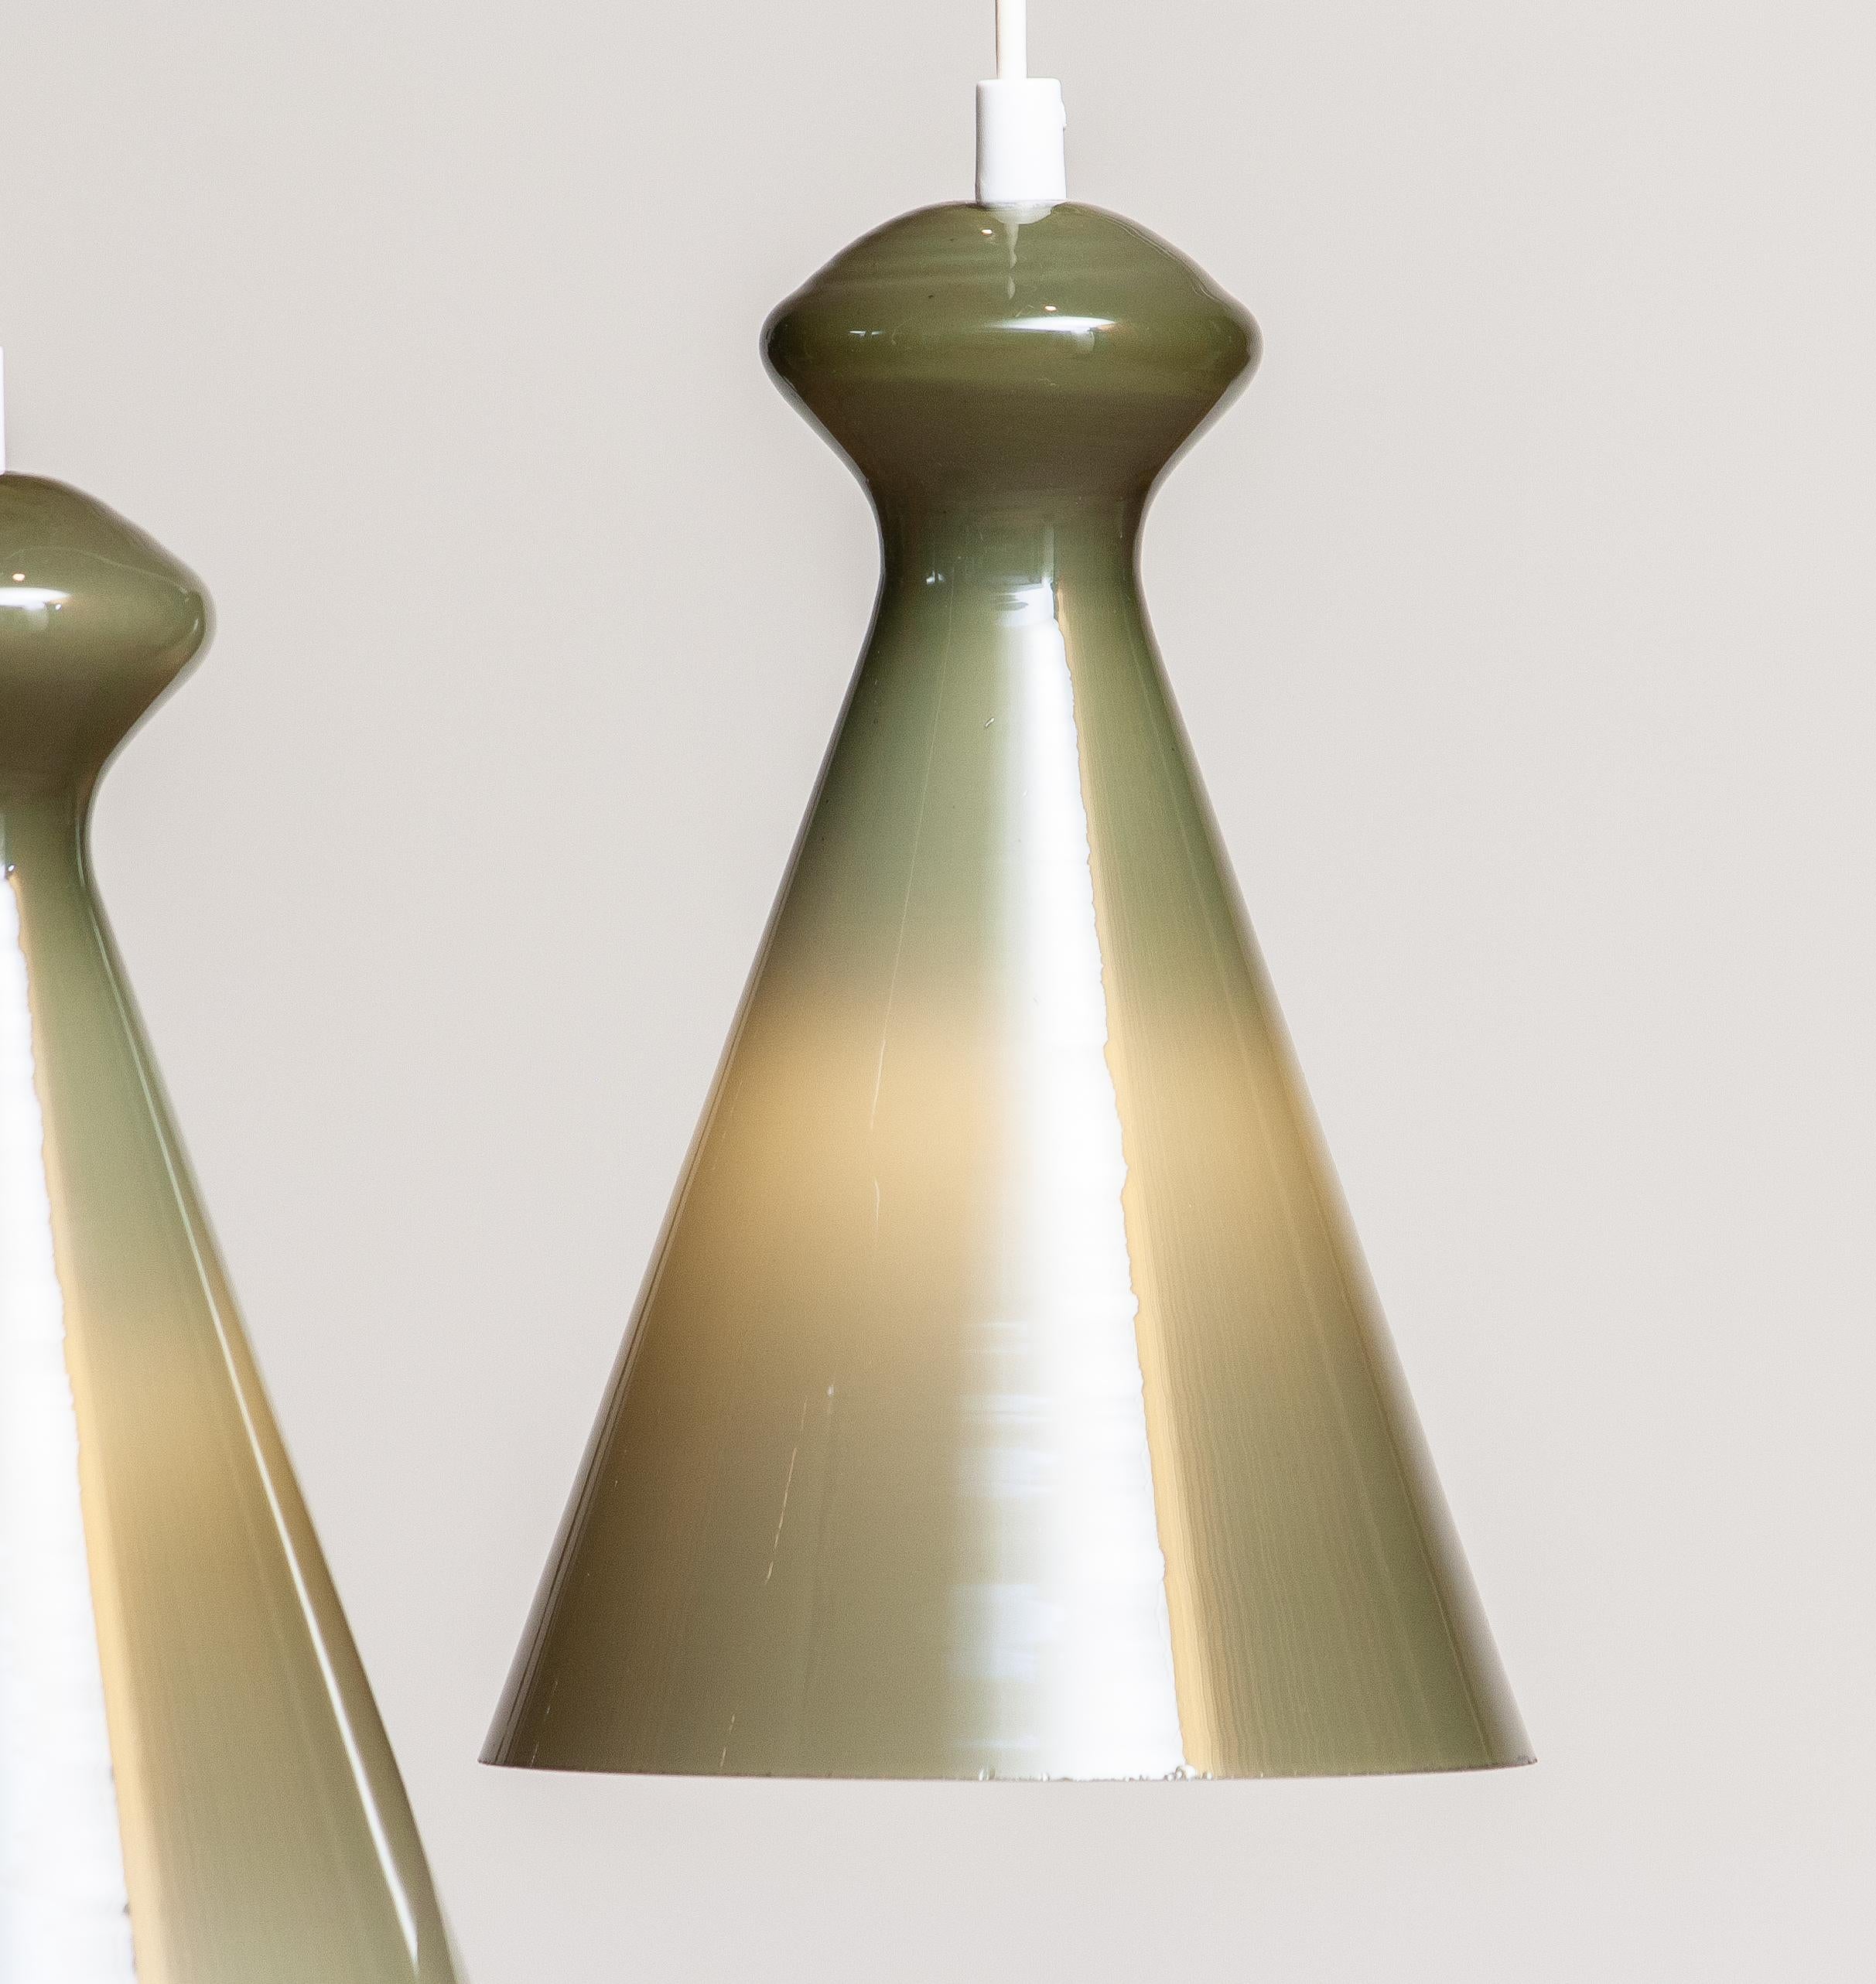 Mid-20th Century 1950 Pair Glass Pendants in Olive Green by Maria Lindeman for Idman Oy, Finland